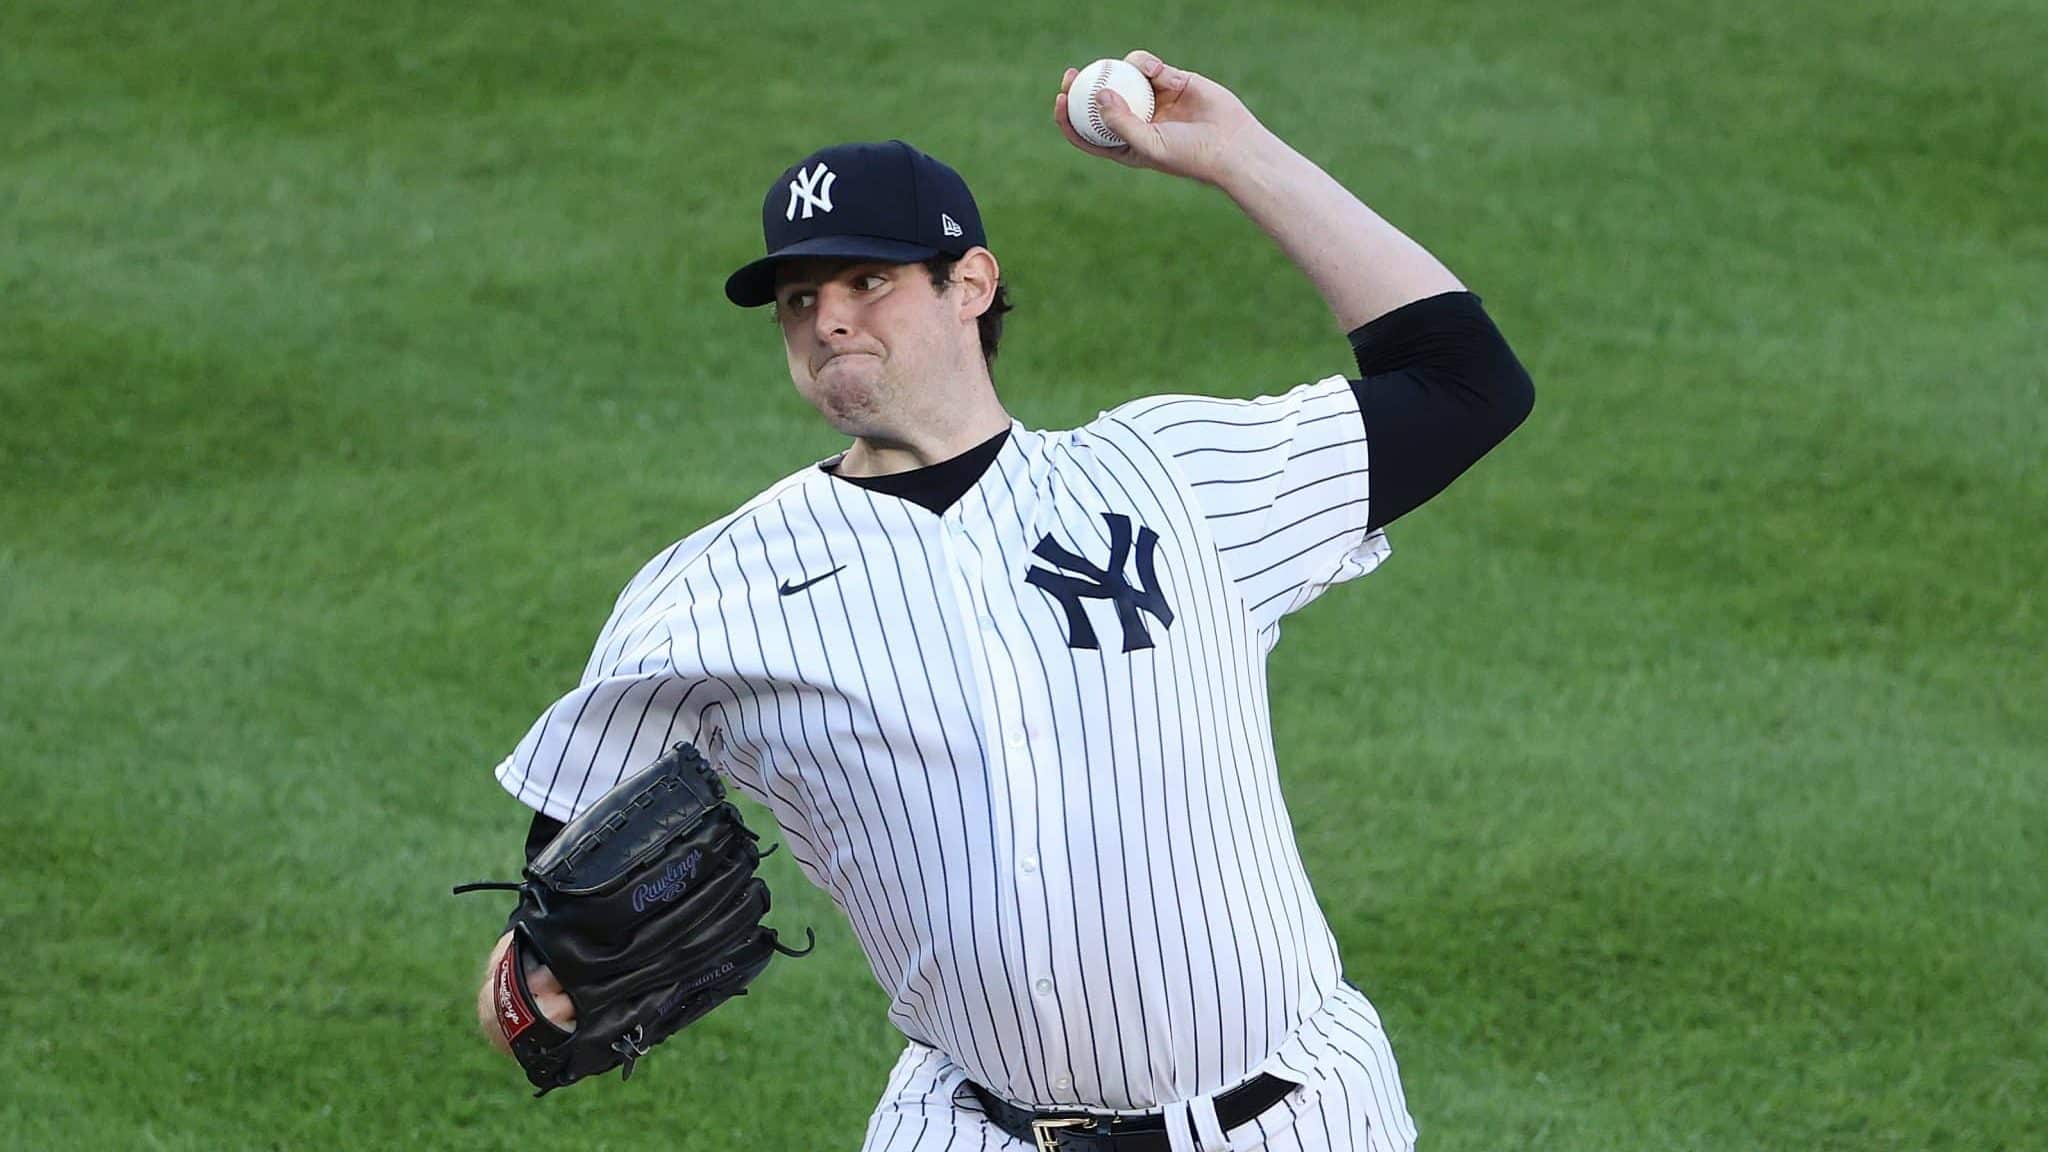 NEW YORK, NEW YORK - JULY 31: Jordan Montgomery #47 of the New York Yankees pitches against the Boston Red Sox during their home opener at Yankee Stadium on July 31, 2020 in New York City. The 2020 season had been postponed since March due to the COVID-19 pandemic.